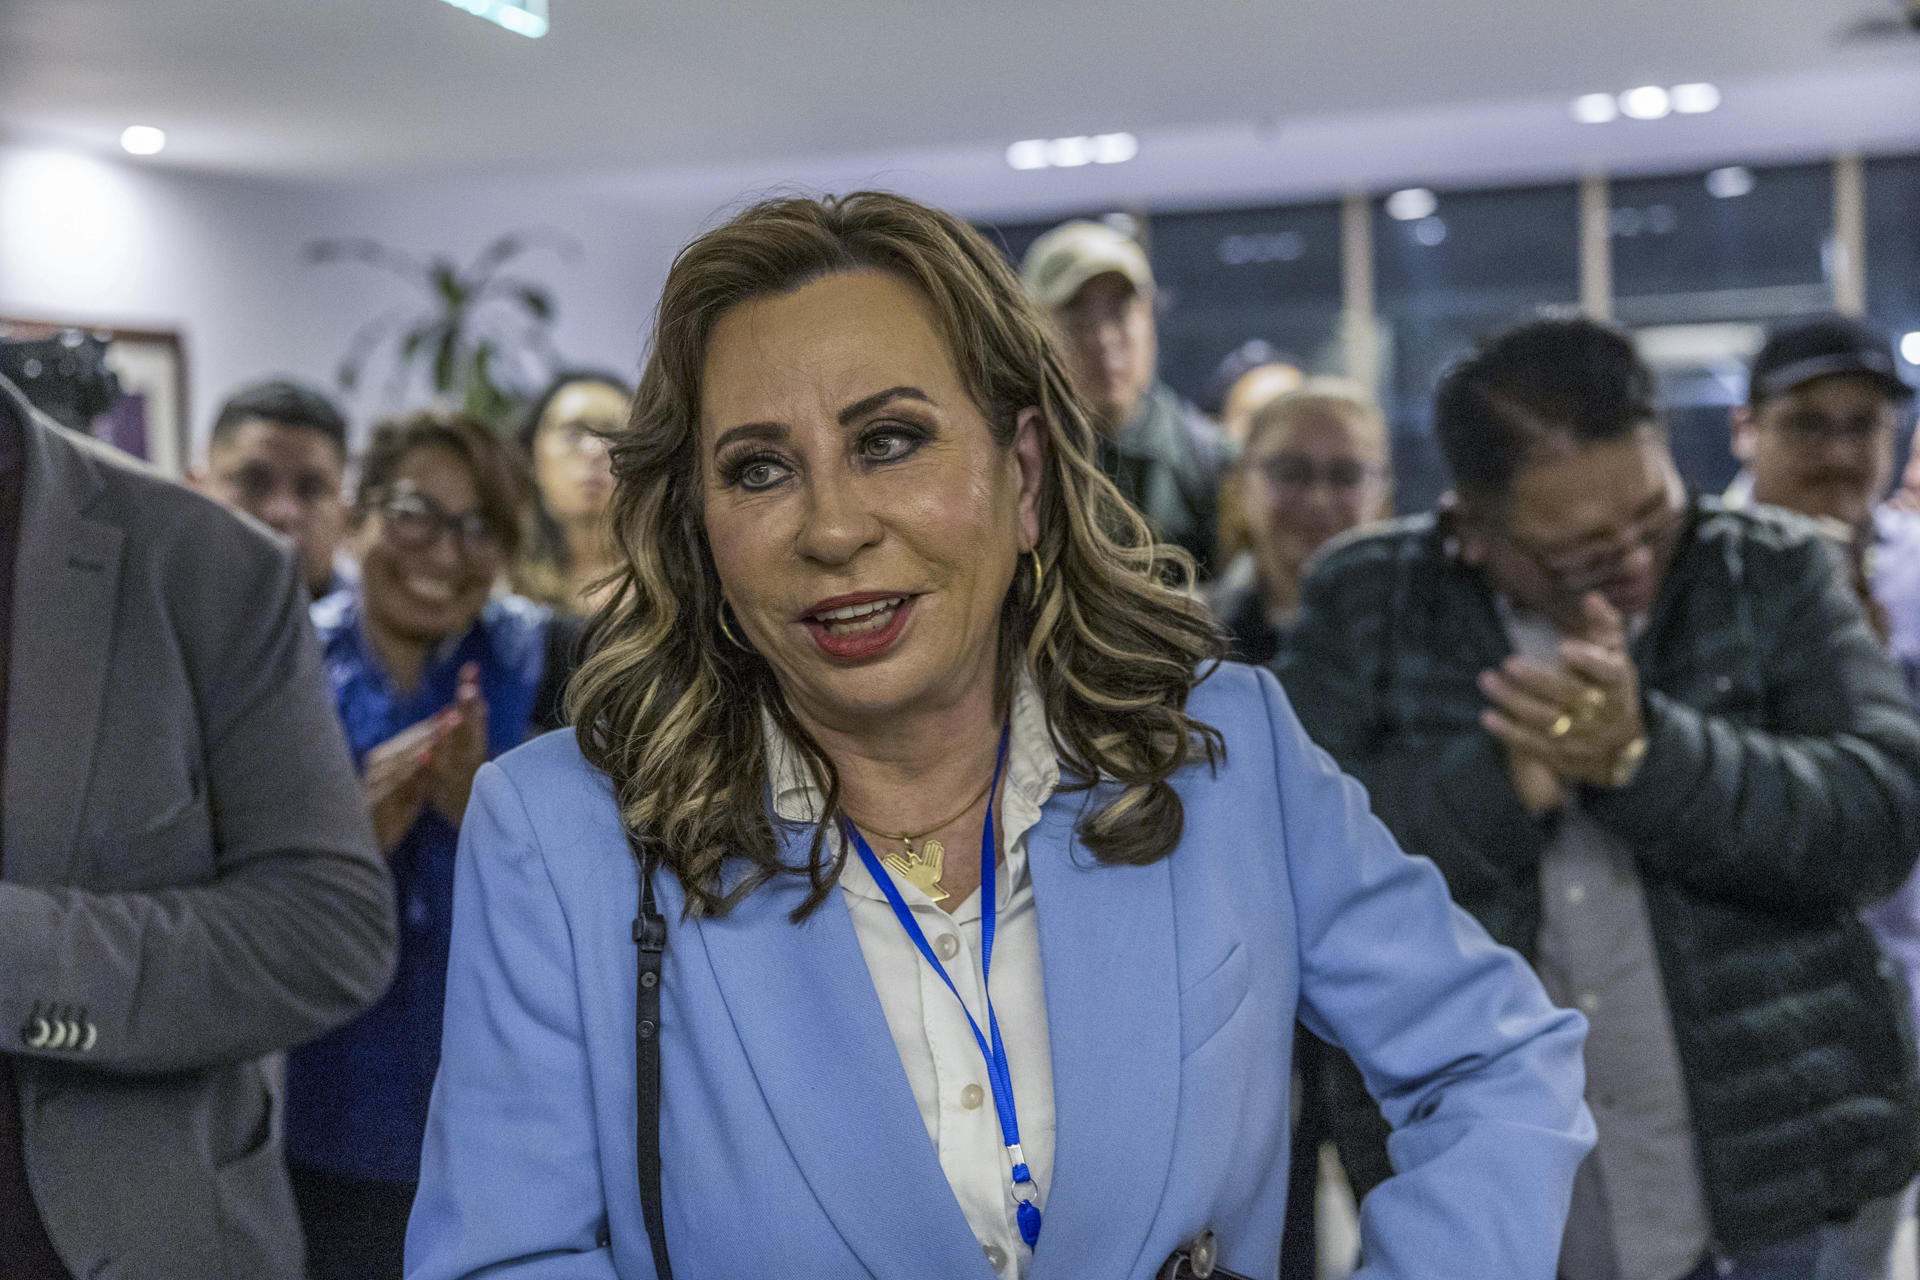 National Unity of Hope (UNE) party's presidential candidate Sandra Torres smiles during a press conference at a hotel in Guatemala, Guatemala City on Monday, 26 June 2023. EFE-EPA/Esteban Biba